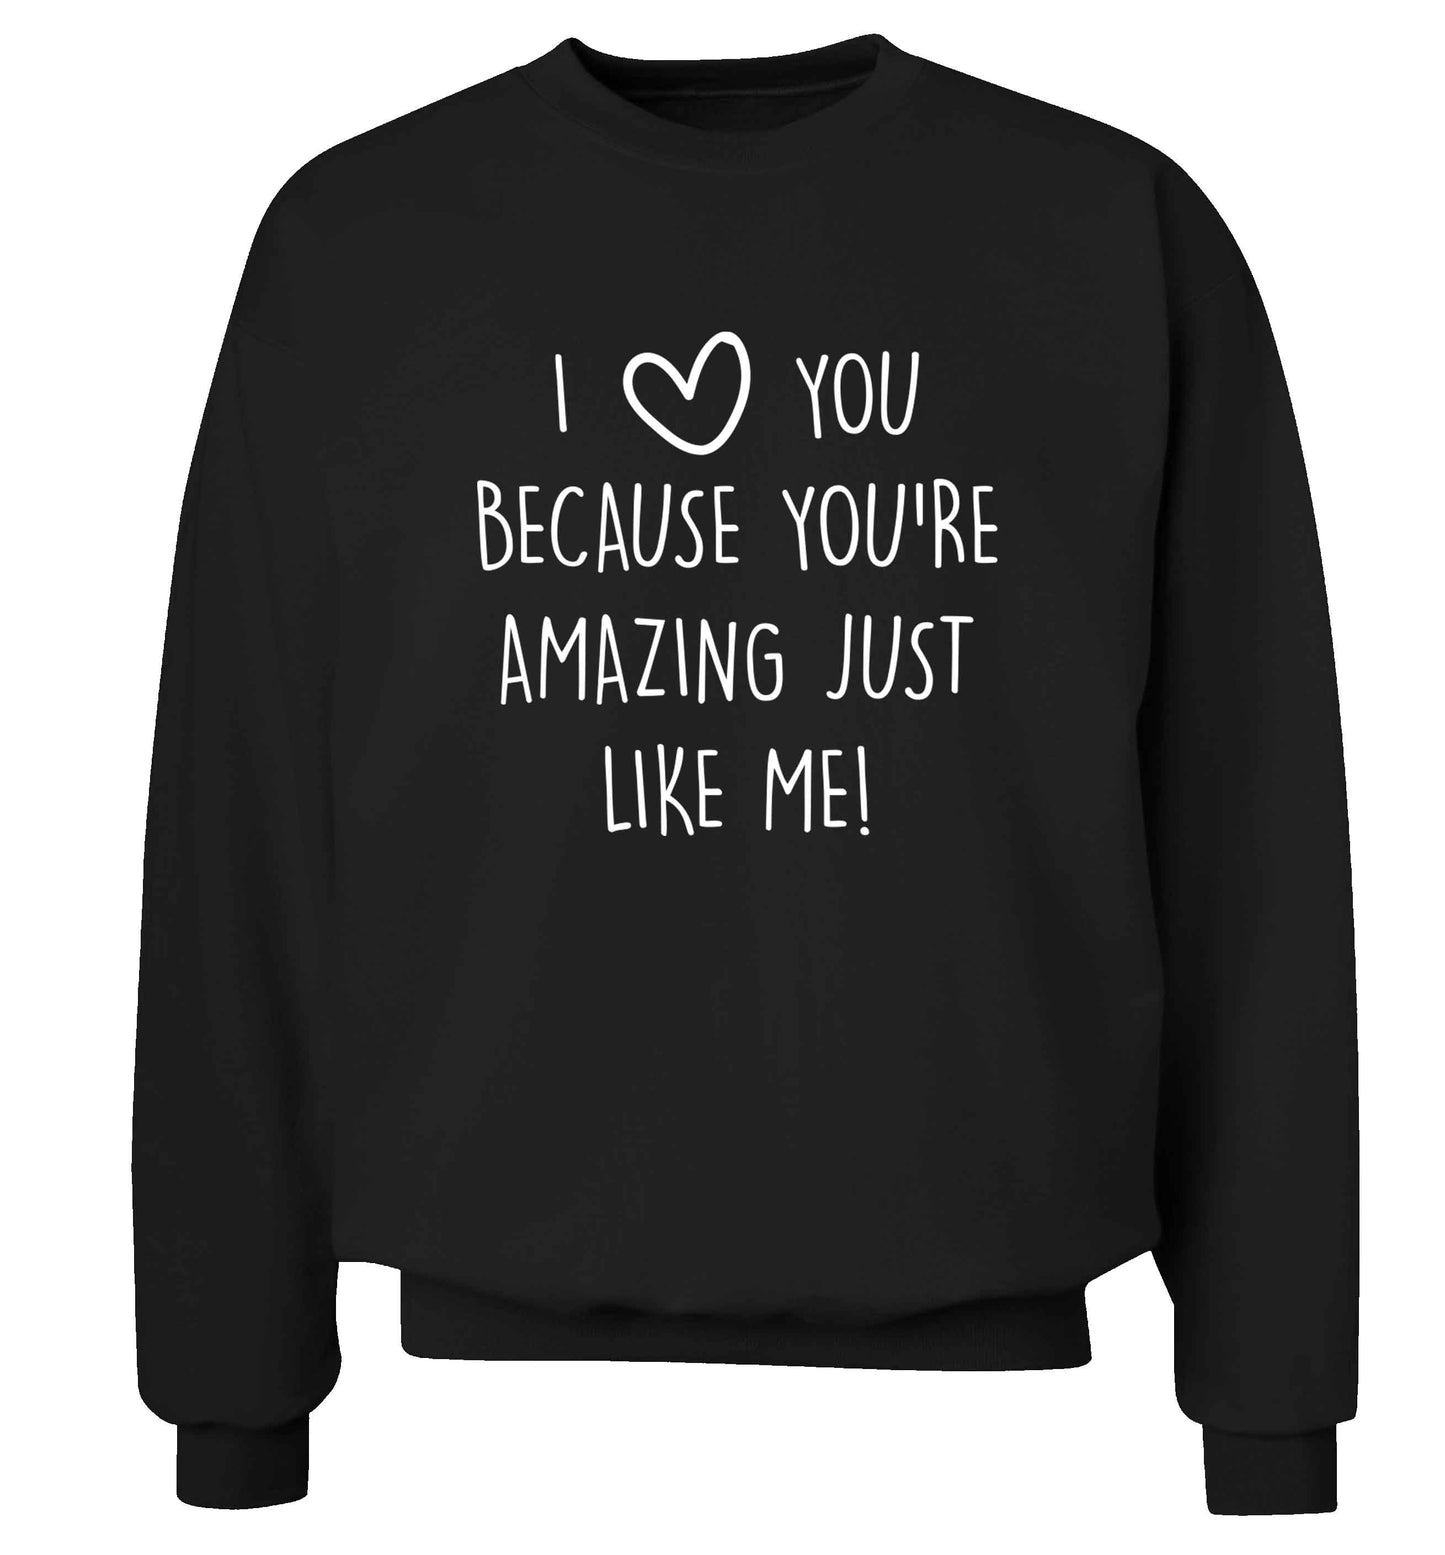 I love you because you're amazing just like me adult's unisex black sweater 2XL